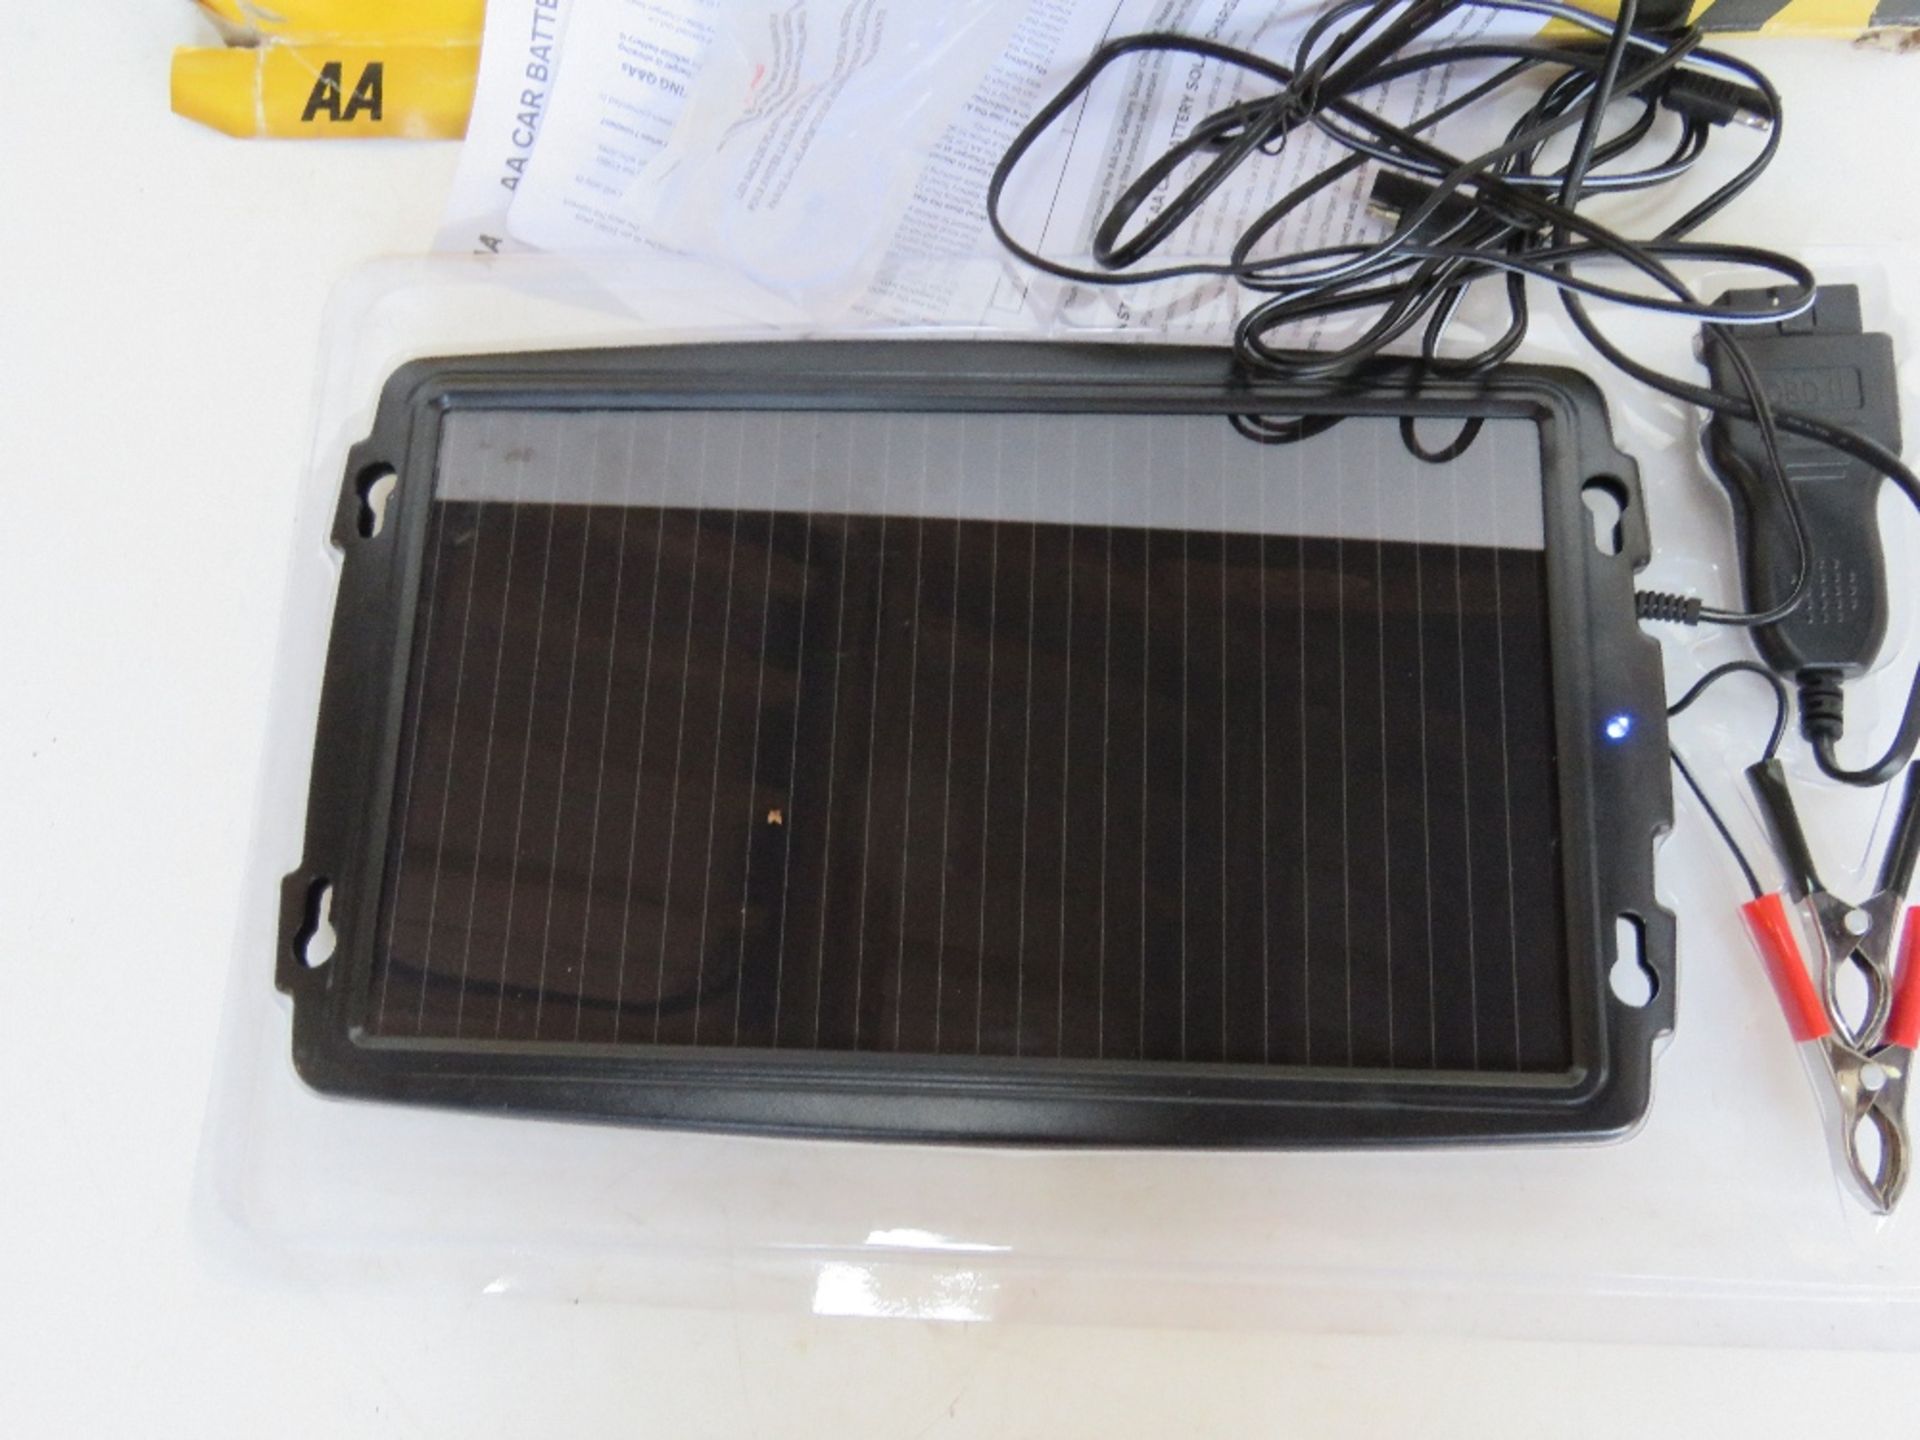 An AA car battery solar charger. In box, box a/f. - Image 3 of 3